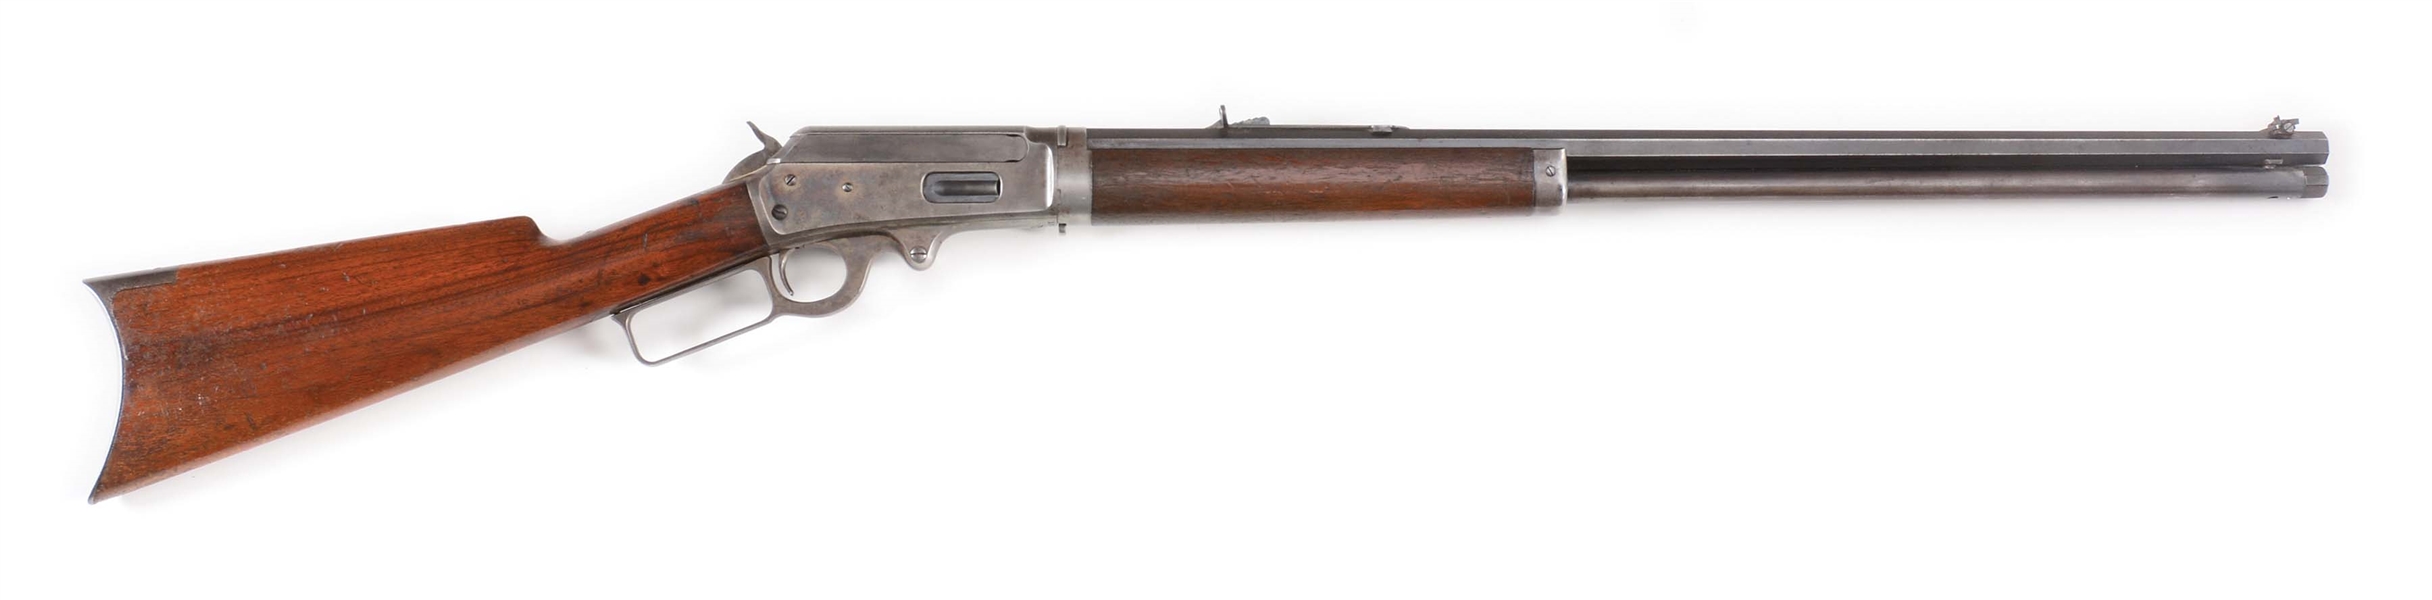 (A) ANTIQUE MARLIN 1893 LEVER ACTION RIFLE (1896).